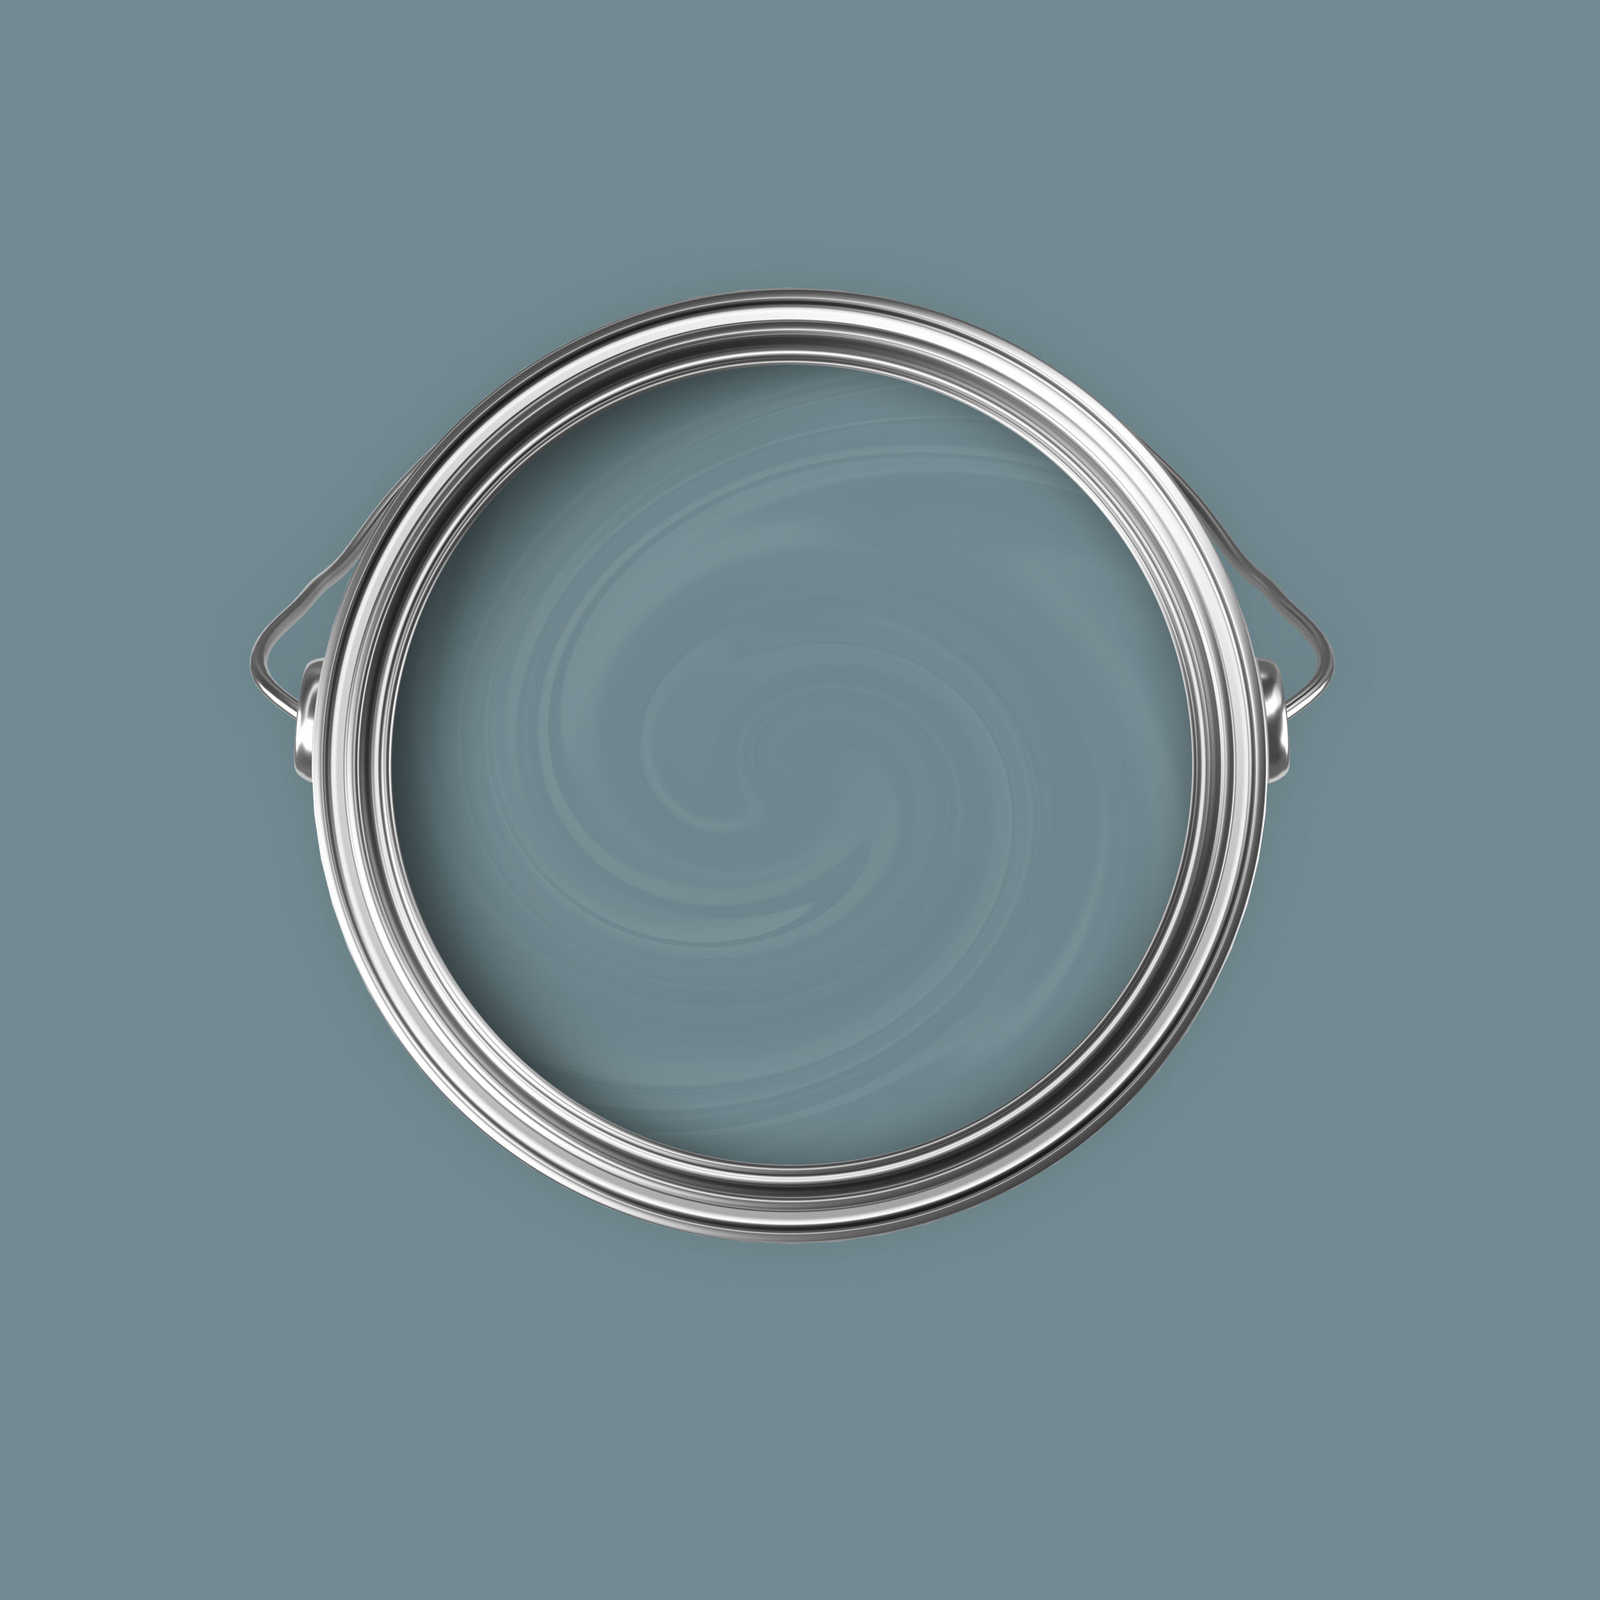             Premium Wall Paint Relaxing Dove Blue »Balanced Blue« NW311 – 5 litre
        